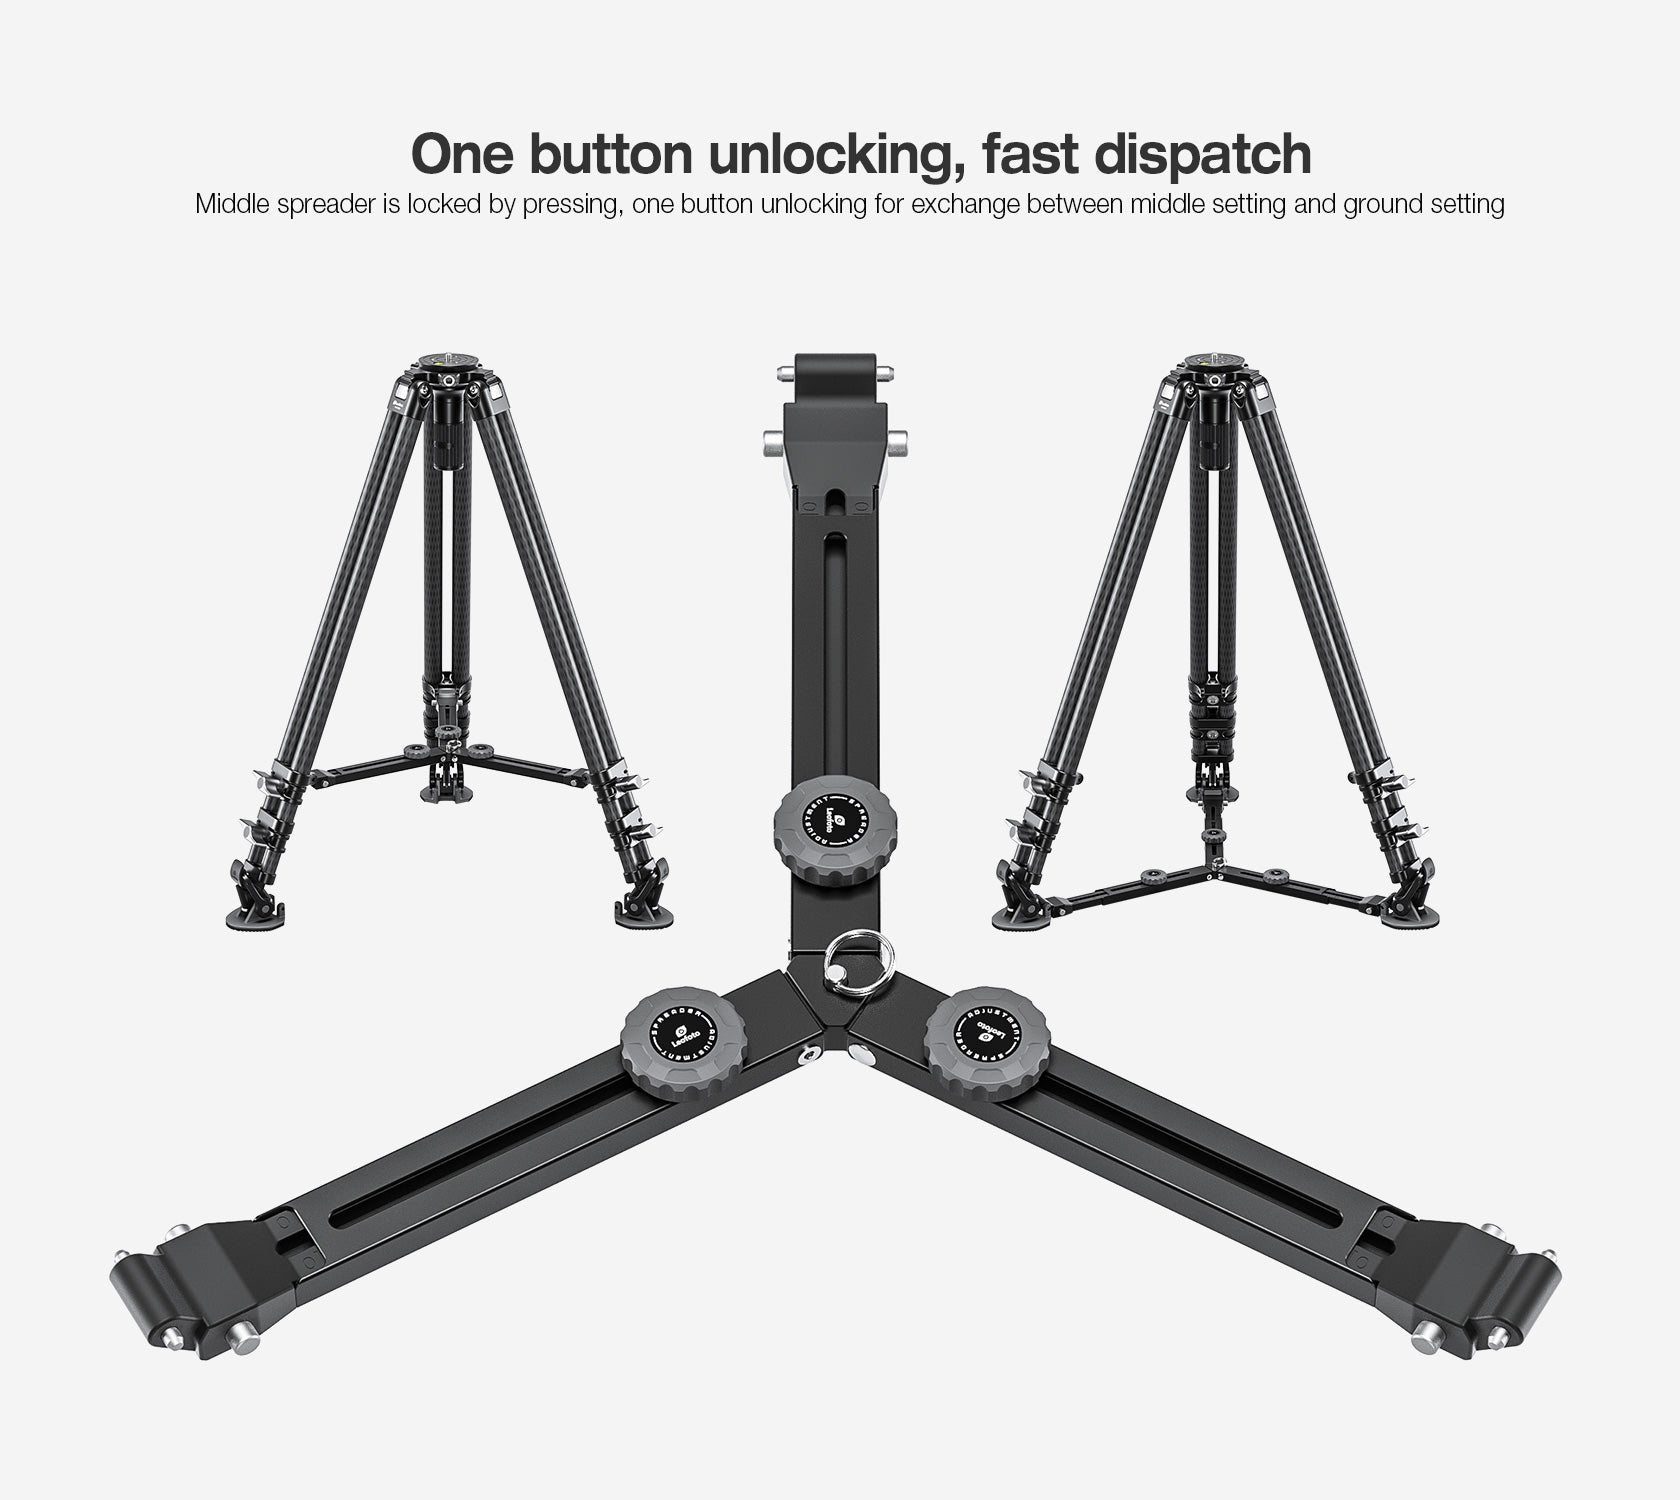 Leofoto LVC-193C Dual-Tube Video Tripod | 75mm Integrated Bowl with Leveling Base and Handle (Tripod Only)